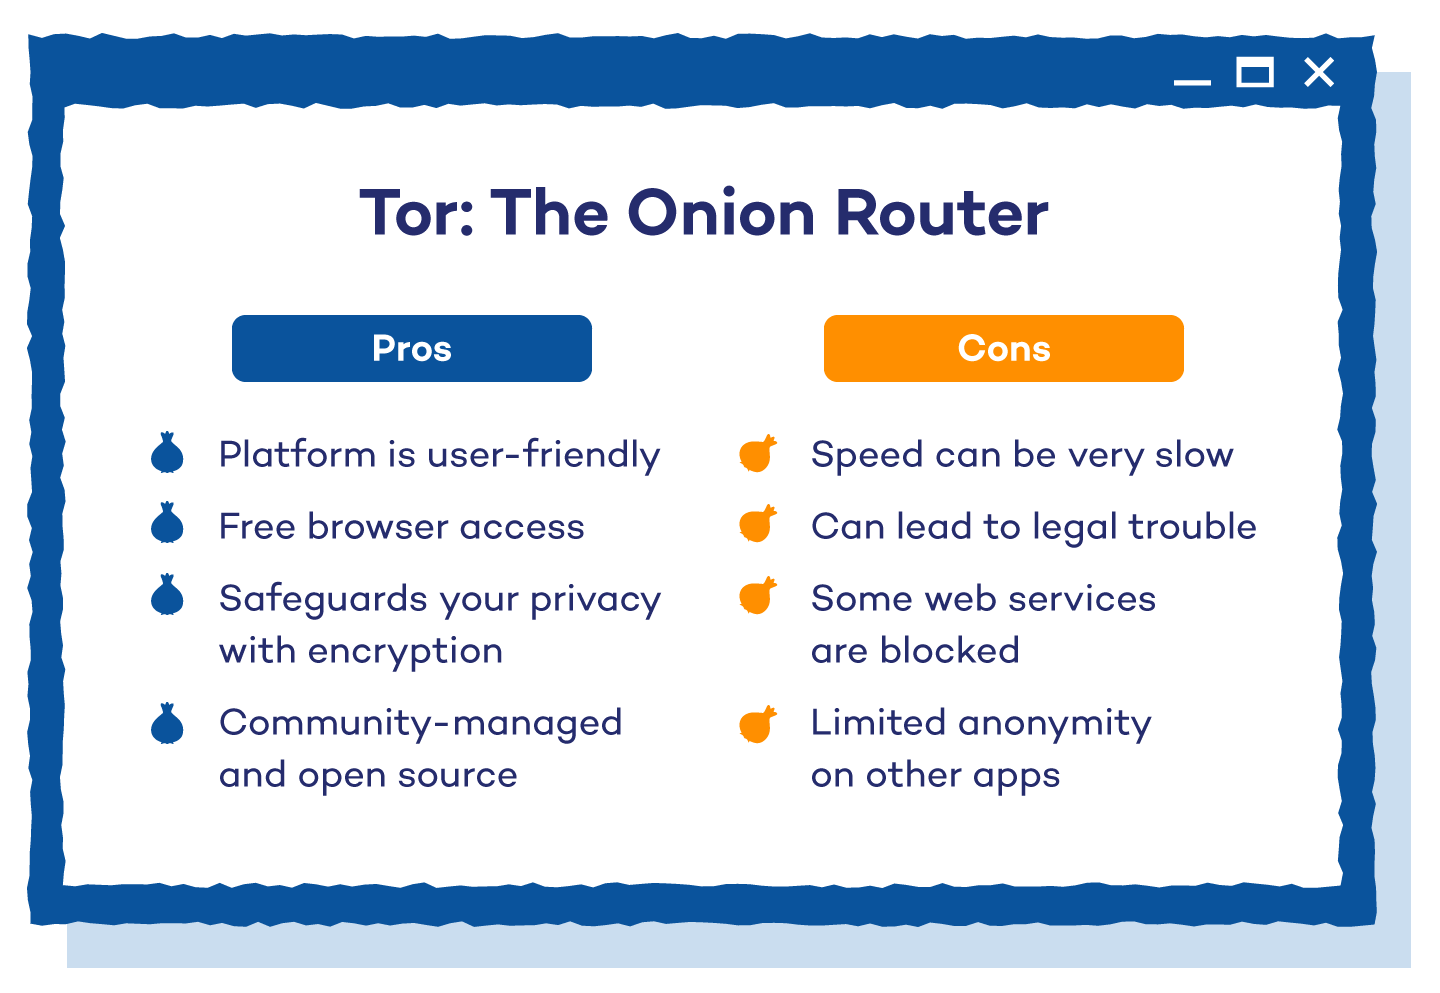 Tor the onion router pros and cons